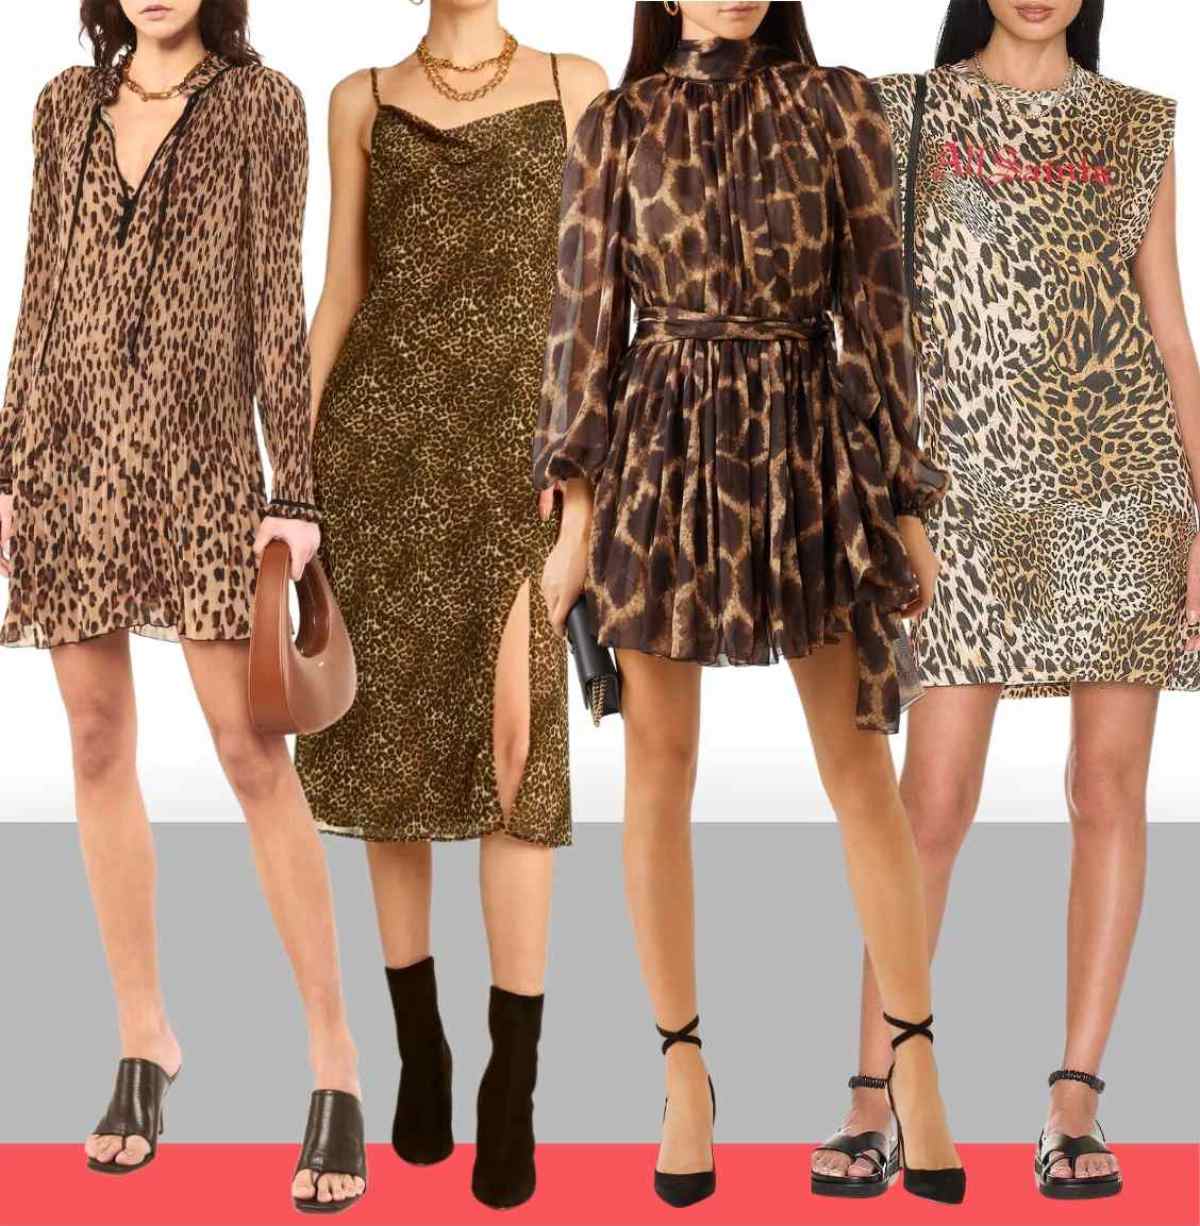 3 women wearing different black shoes with leopard print dress outfits.